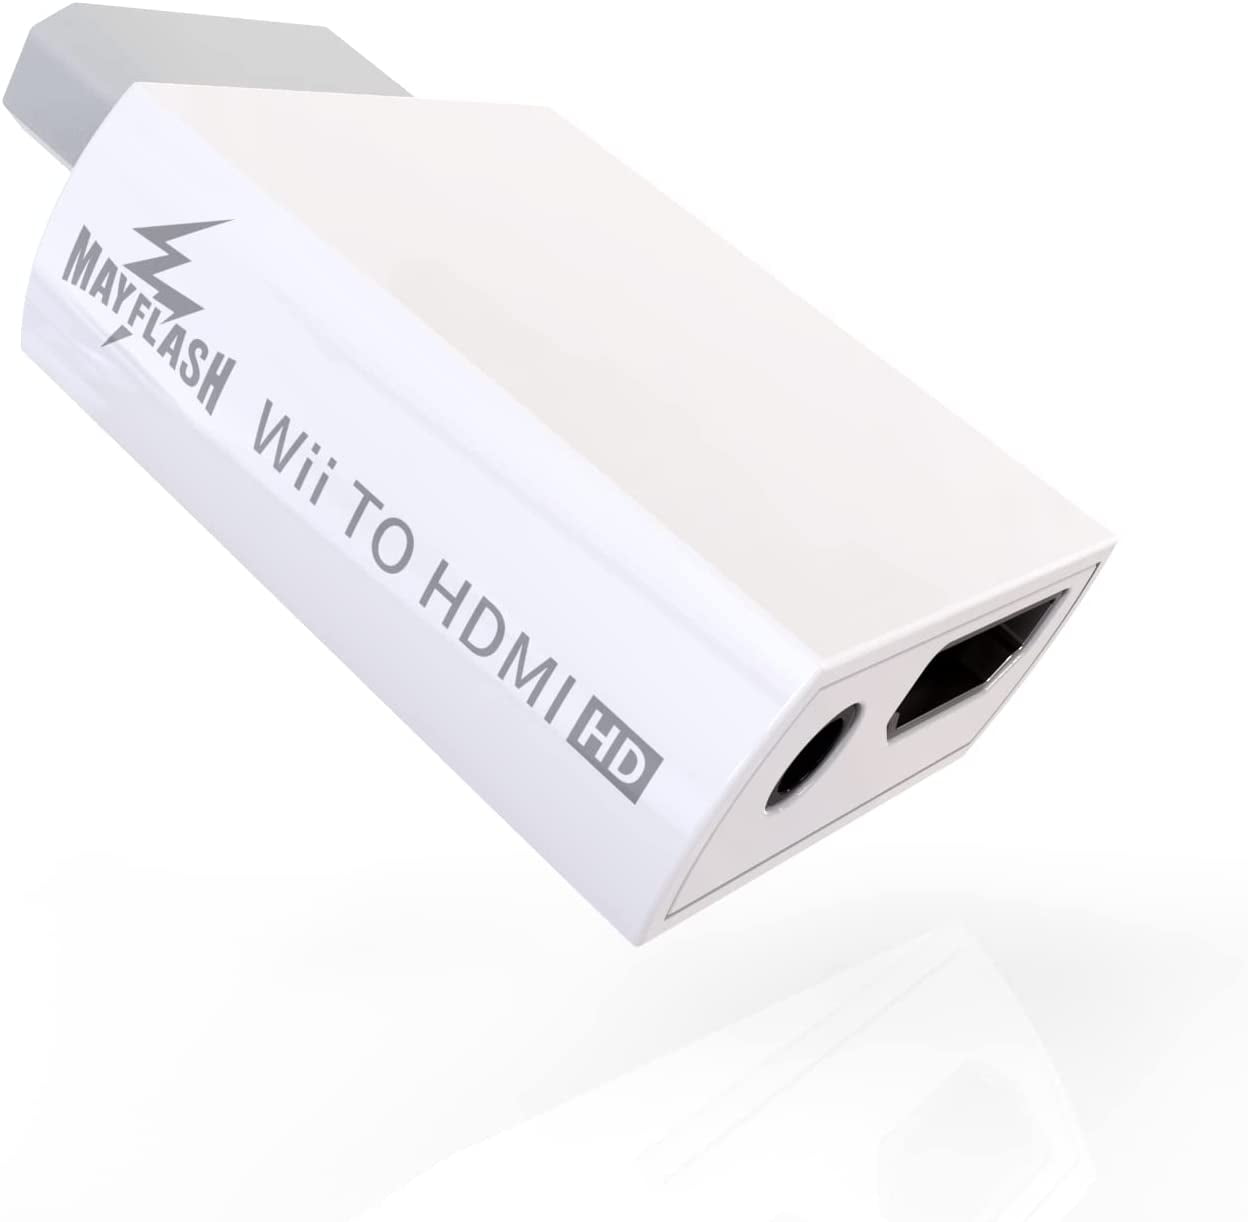 Wii to HDMI Converter 1080P for Full Device, Wii HDMI Adapter with Audio Jack&HDMI Output with Wii, Wii U, HDTV, Monitor-Supports Wii Display Modes 720P, NTS - Walmart.com